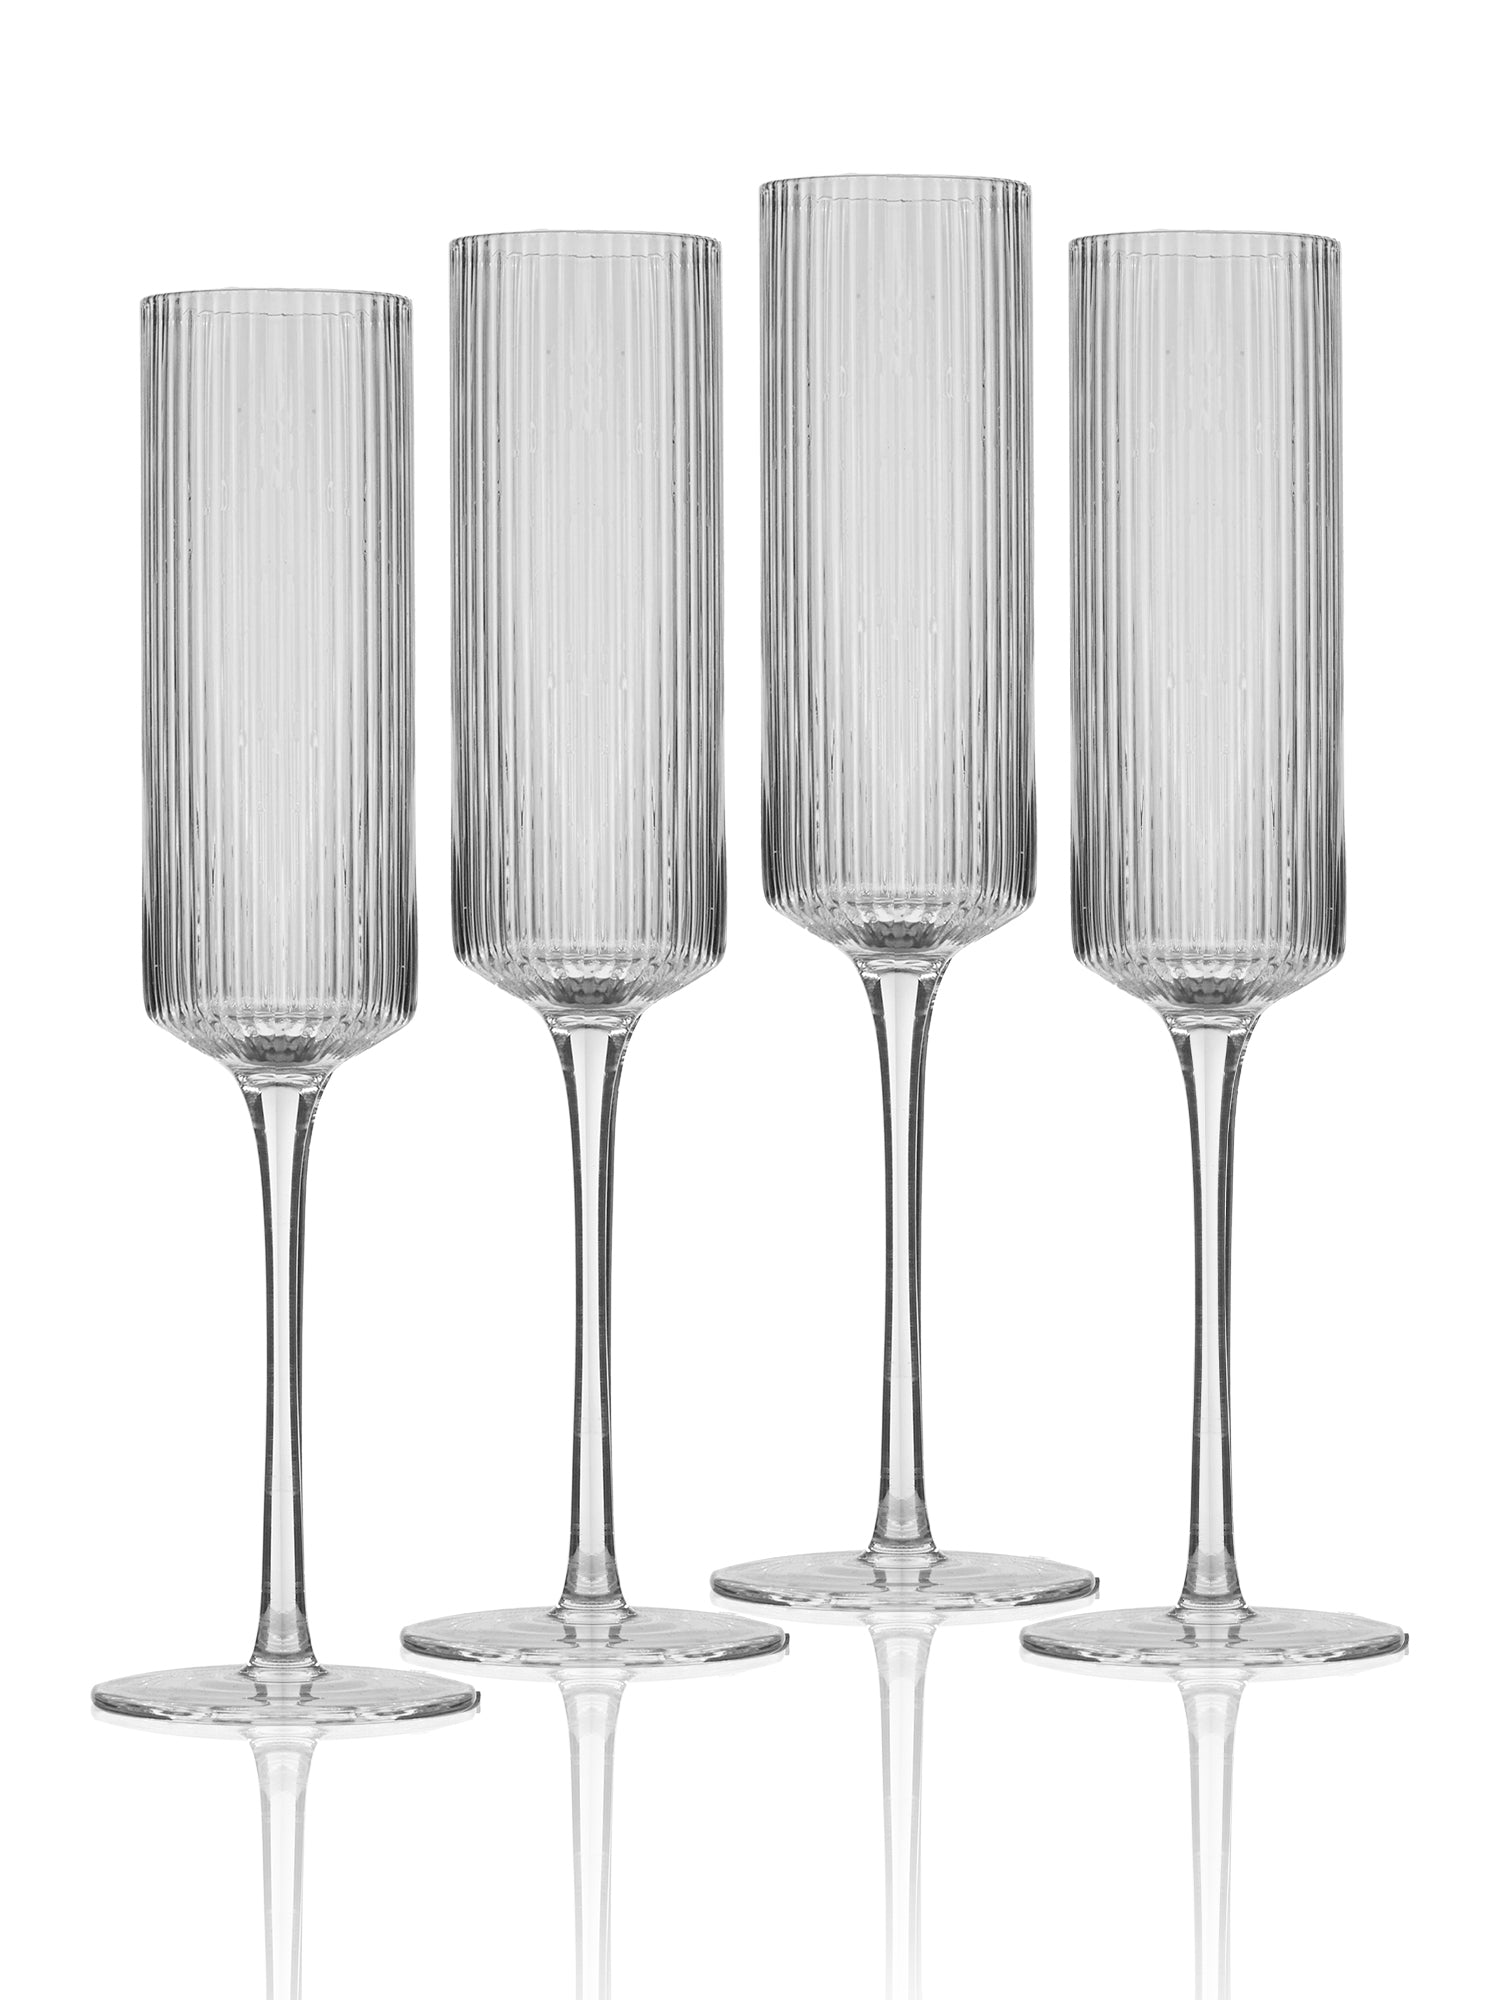 Exquisite Champagne Glass- German Crystal - Set of 4